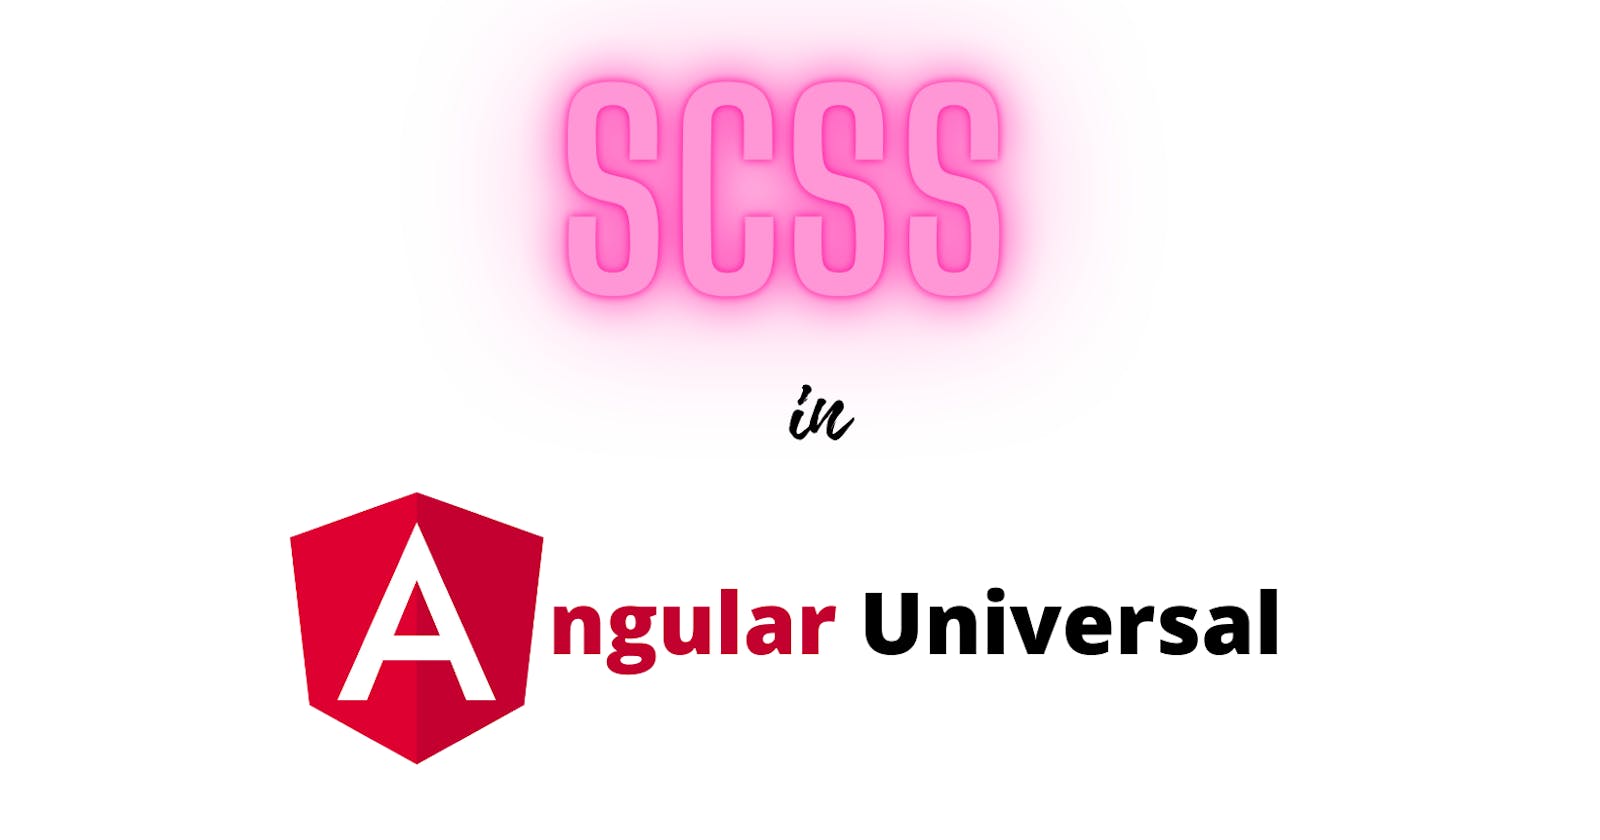 Angular Universal: SCSS imports in Components